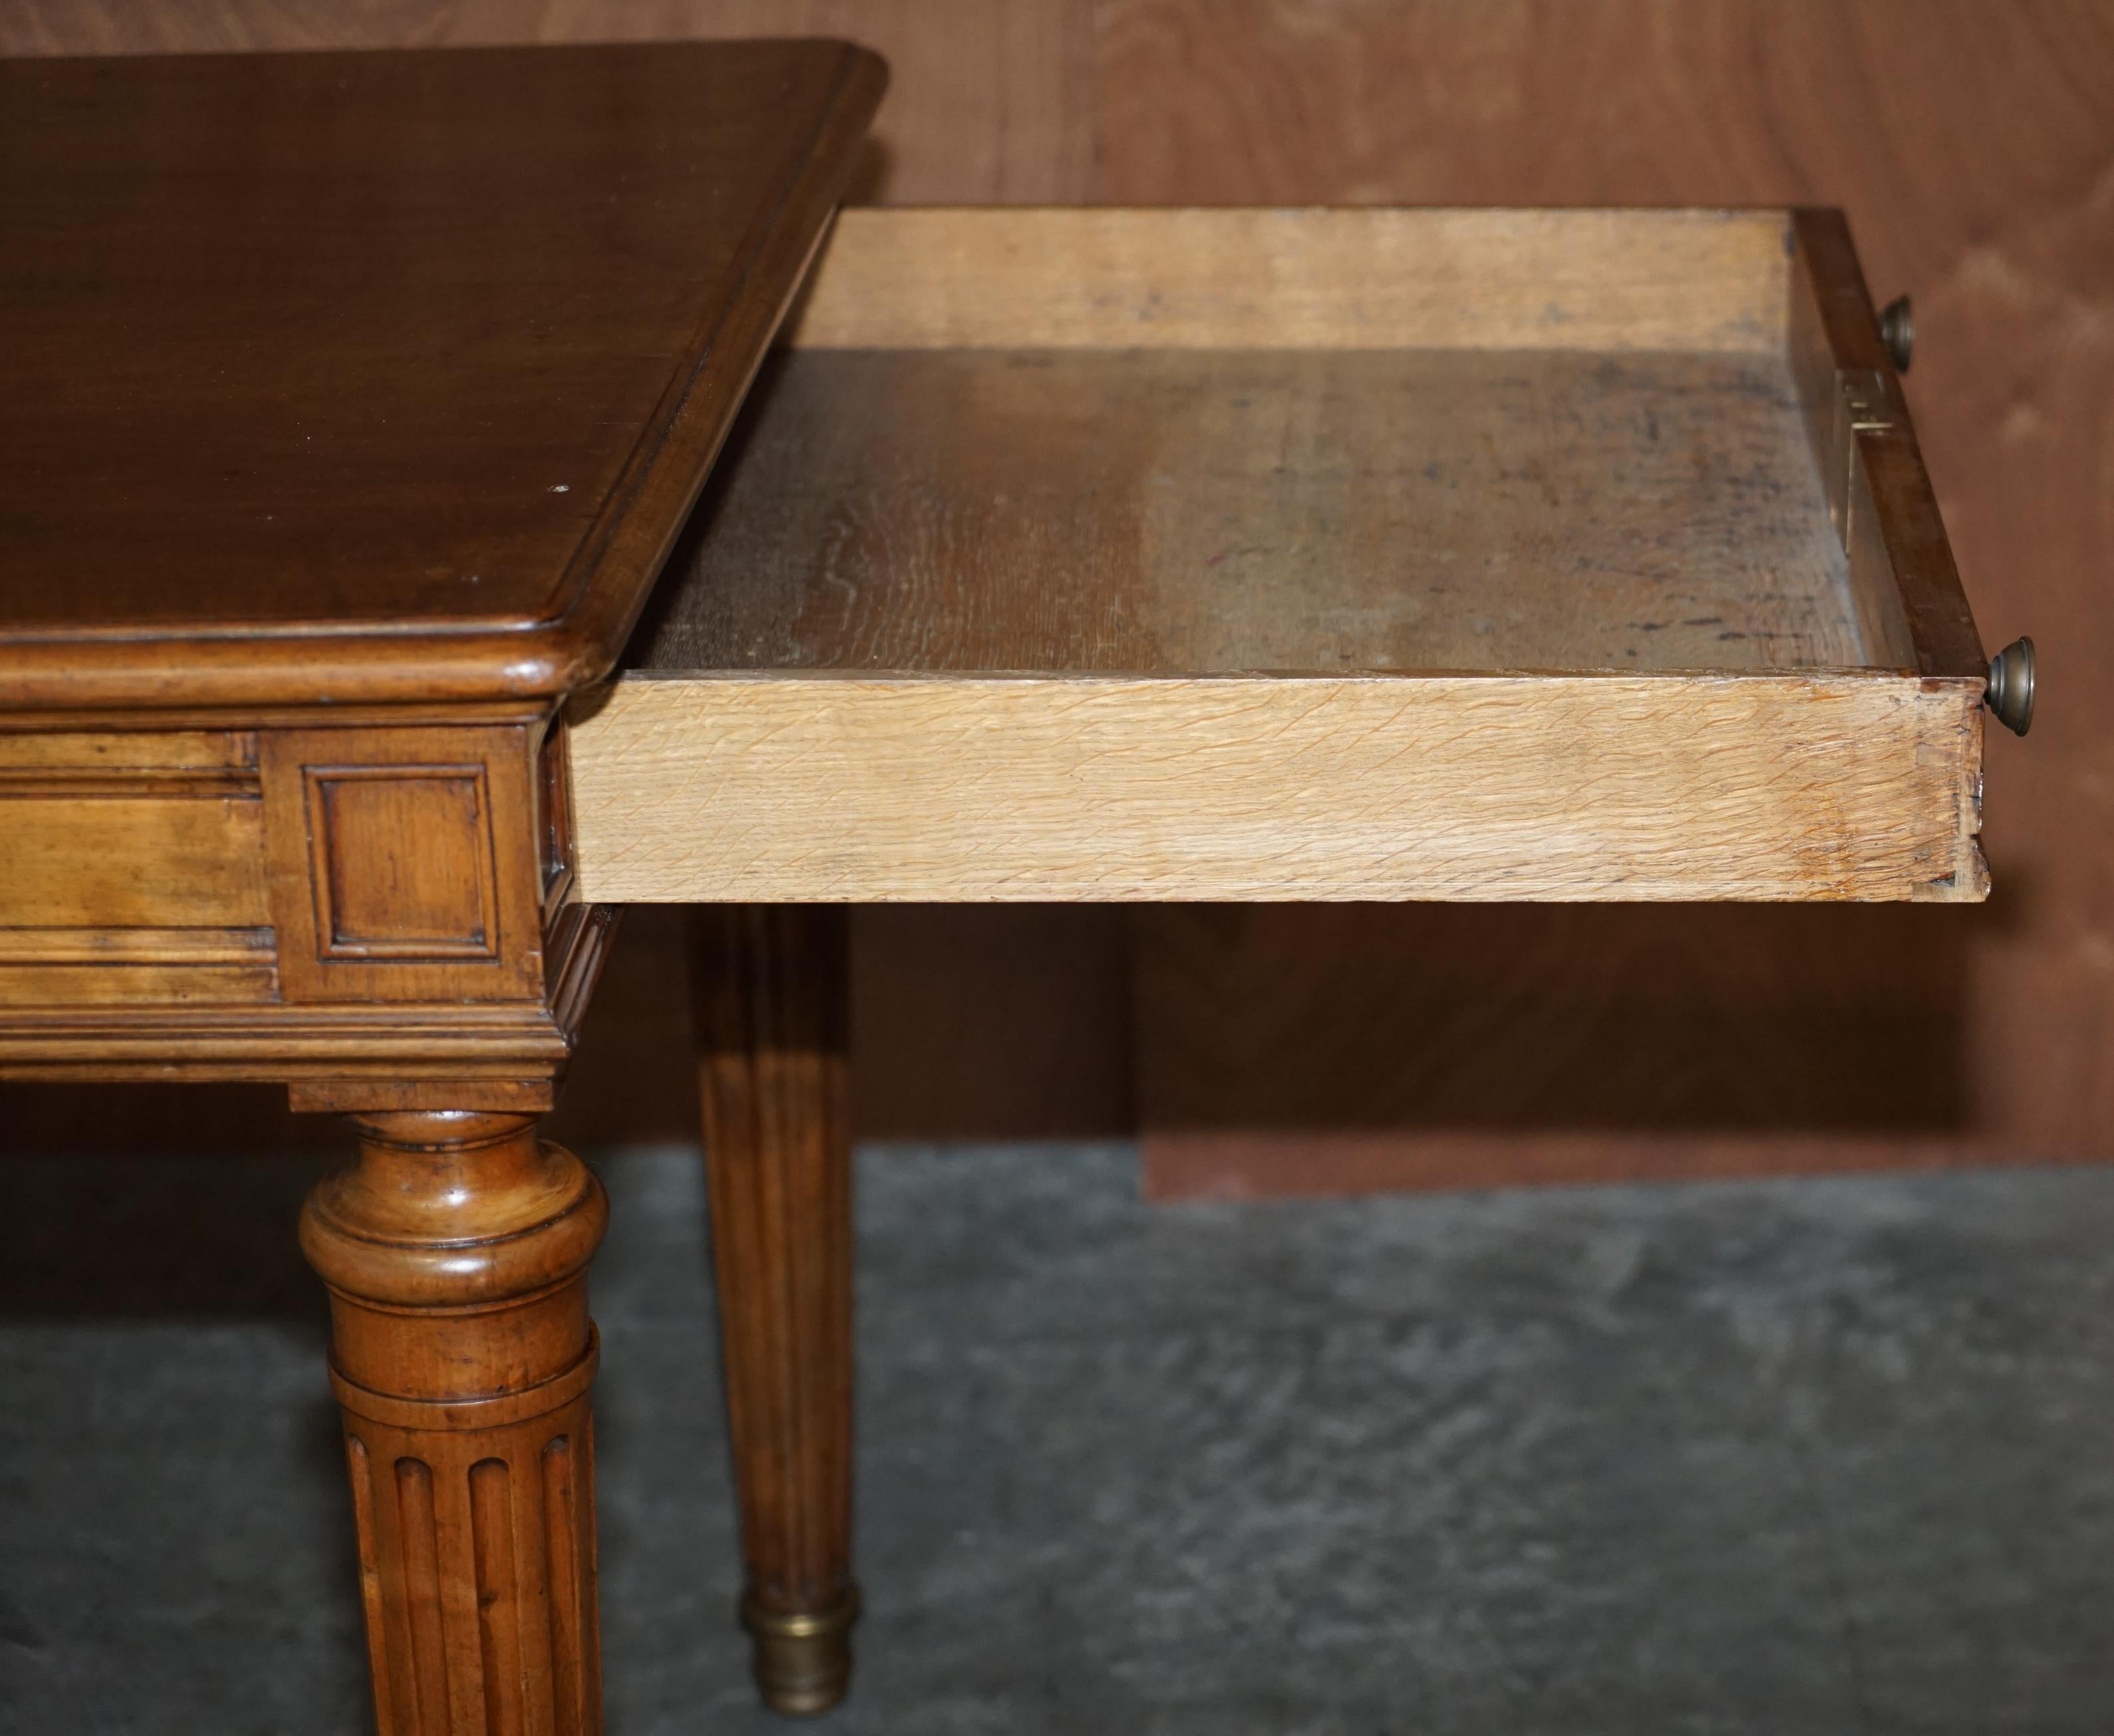 Rare Antique circa 1860 Library Writing Table Desk with Twin Writing Slopes For Sale 6